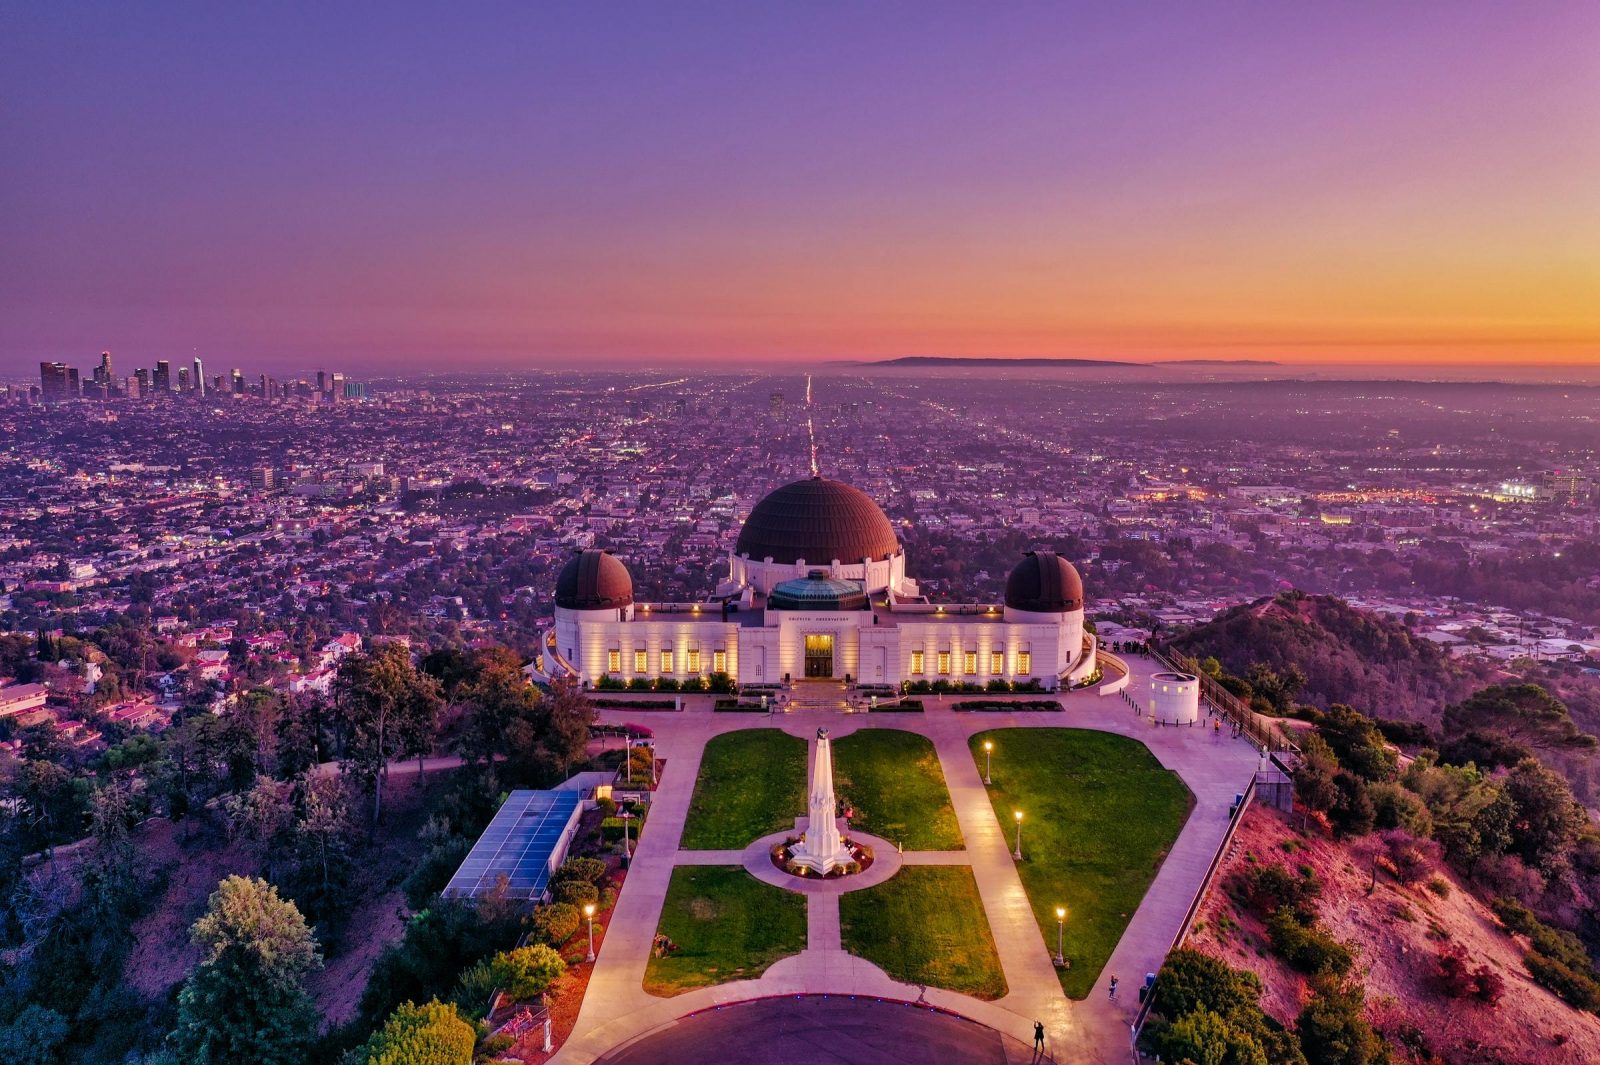 Can You Pass This 40-Question Geography Test That Gets Progressively Harder With Each Question? Griffith Observatory, Los Angeles